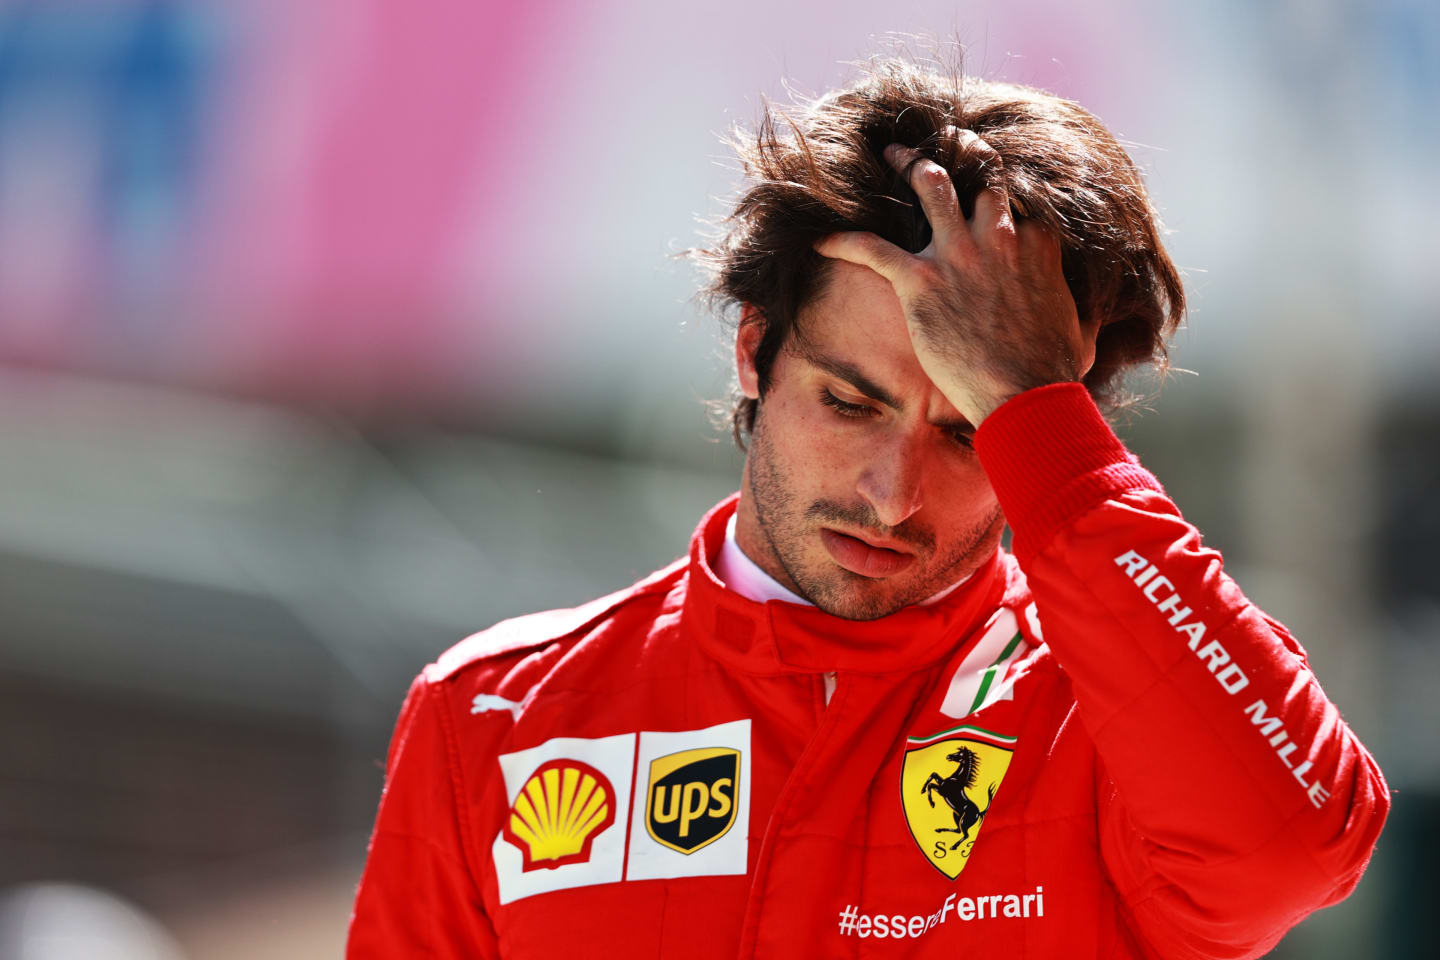 SPIELBERG, AUSTRIA - JULY 03: Carlos Sainz of Spain and Ferrari looks dejected in the Pitlane during qualifying ahead of the F1 Grand Prix of Austria at Red Bull Ring on July 03, 2021 in Spielberg, Austria. (Photo by Mark Thompson/Getty Images)